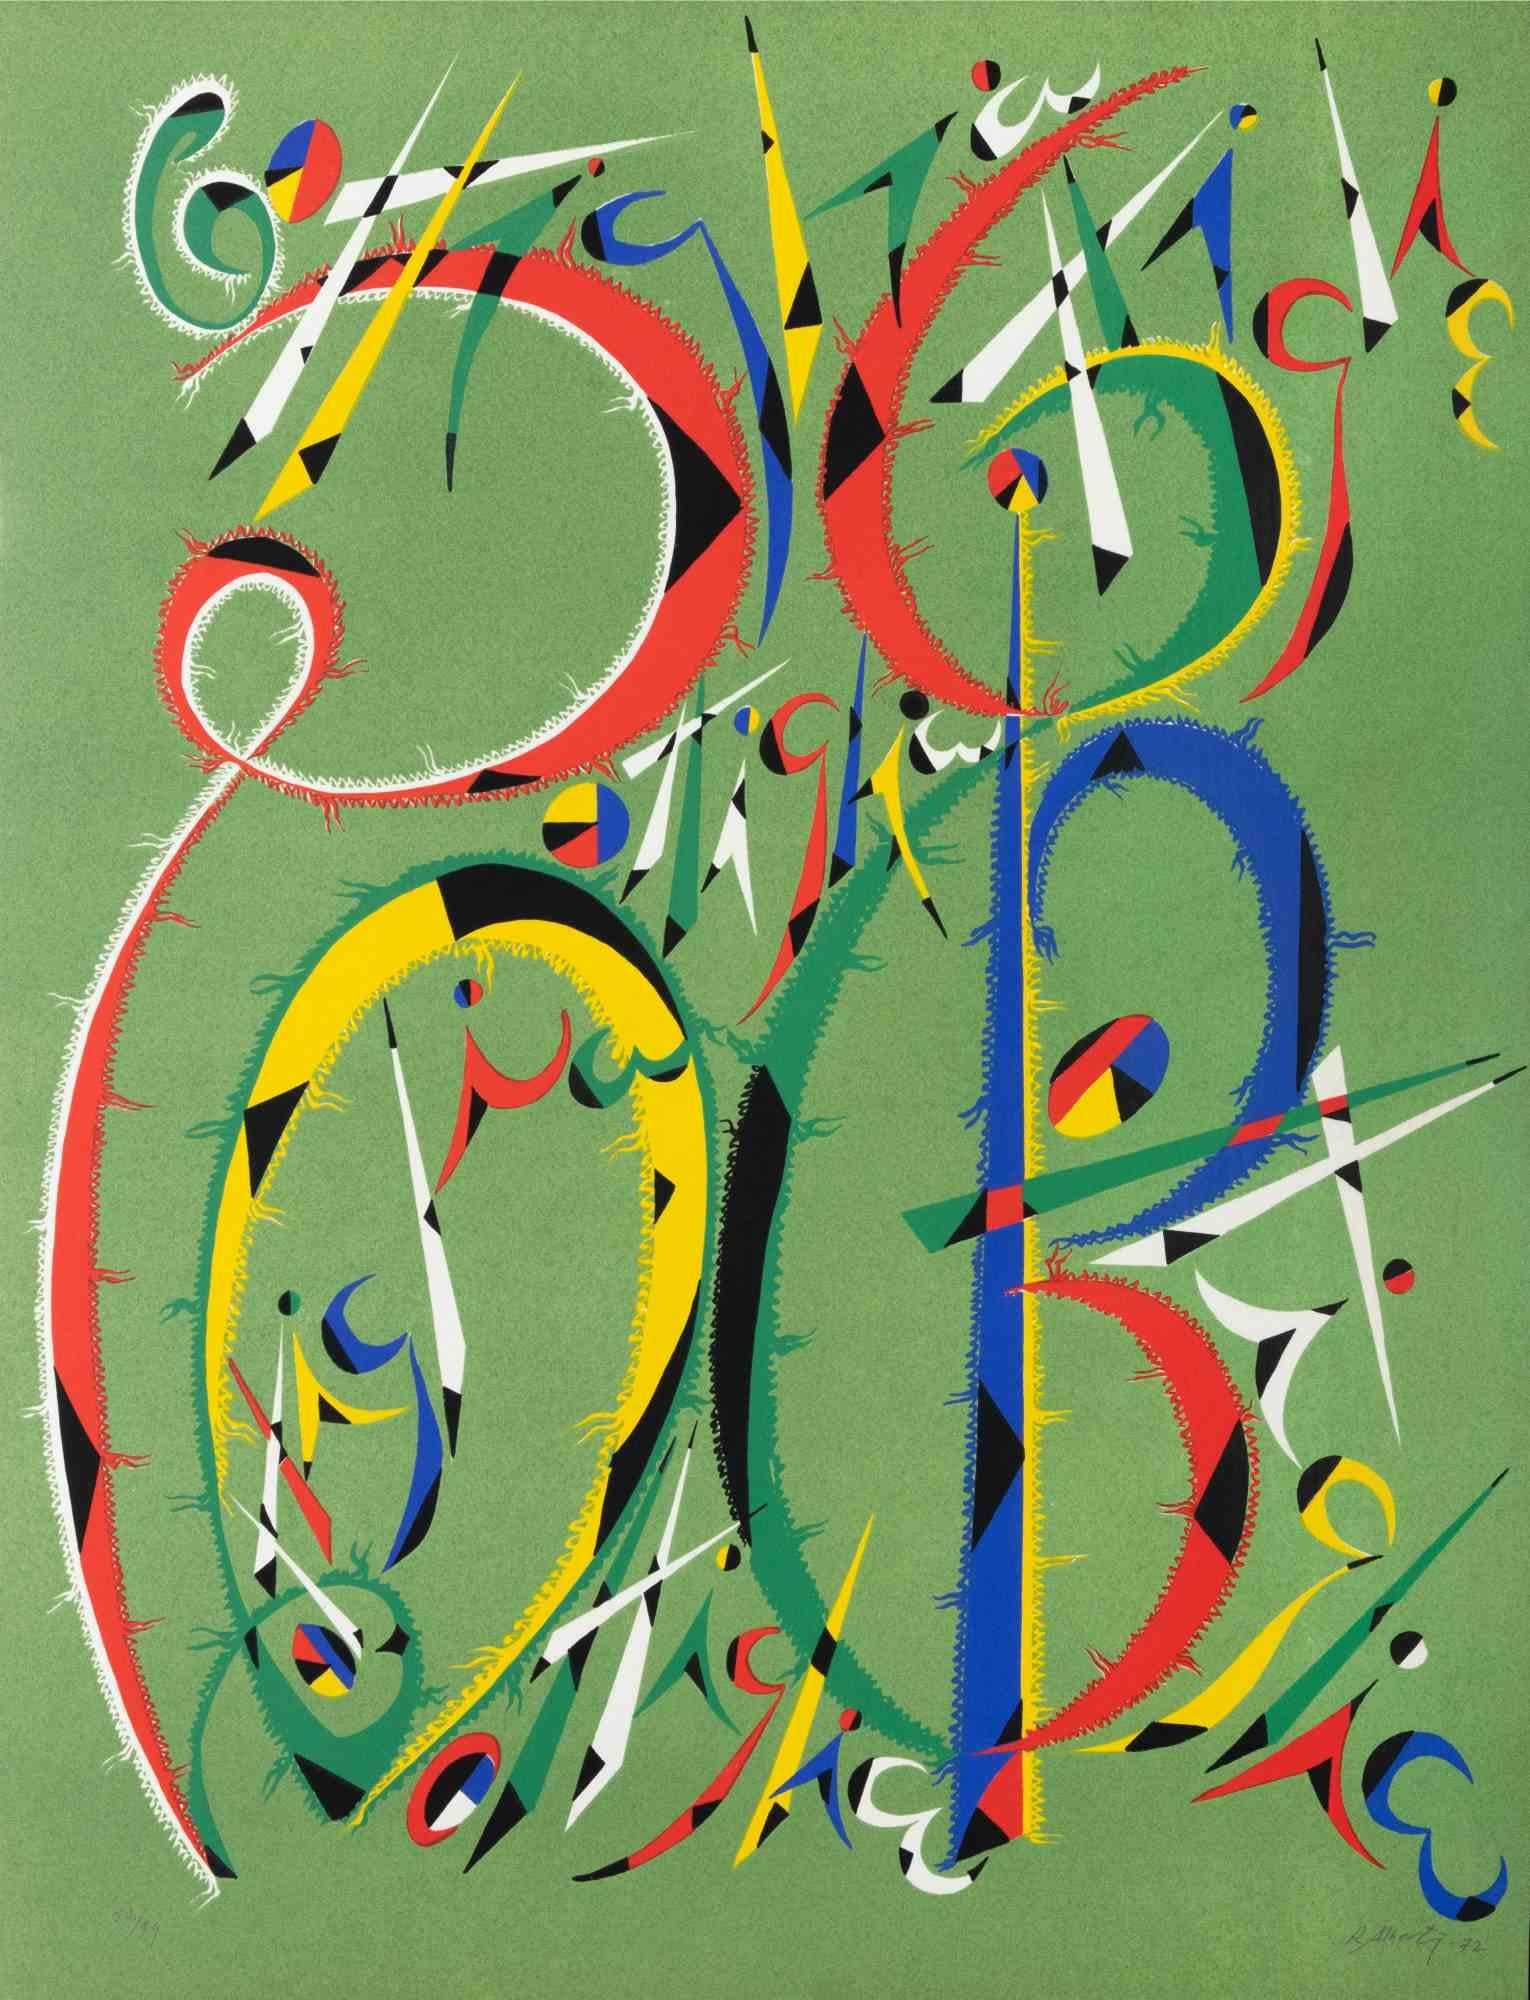 Letter B by Rafael Alberti, from Alphabet series,  is a lithograph, realized by Rafael Alberti in 1972.

Hand signed and dated on the lower right margin. Numbered on the lower left.

Editioon of 52/99

The artwork represents the letter B, with a